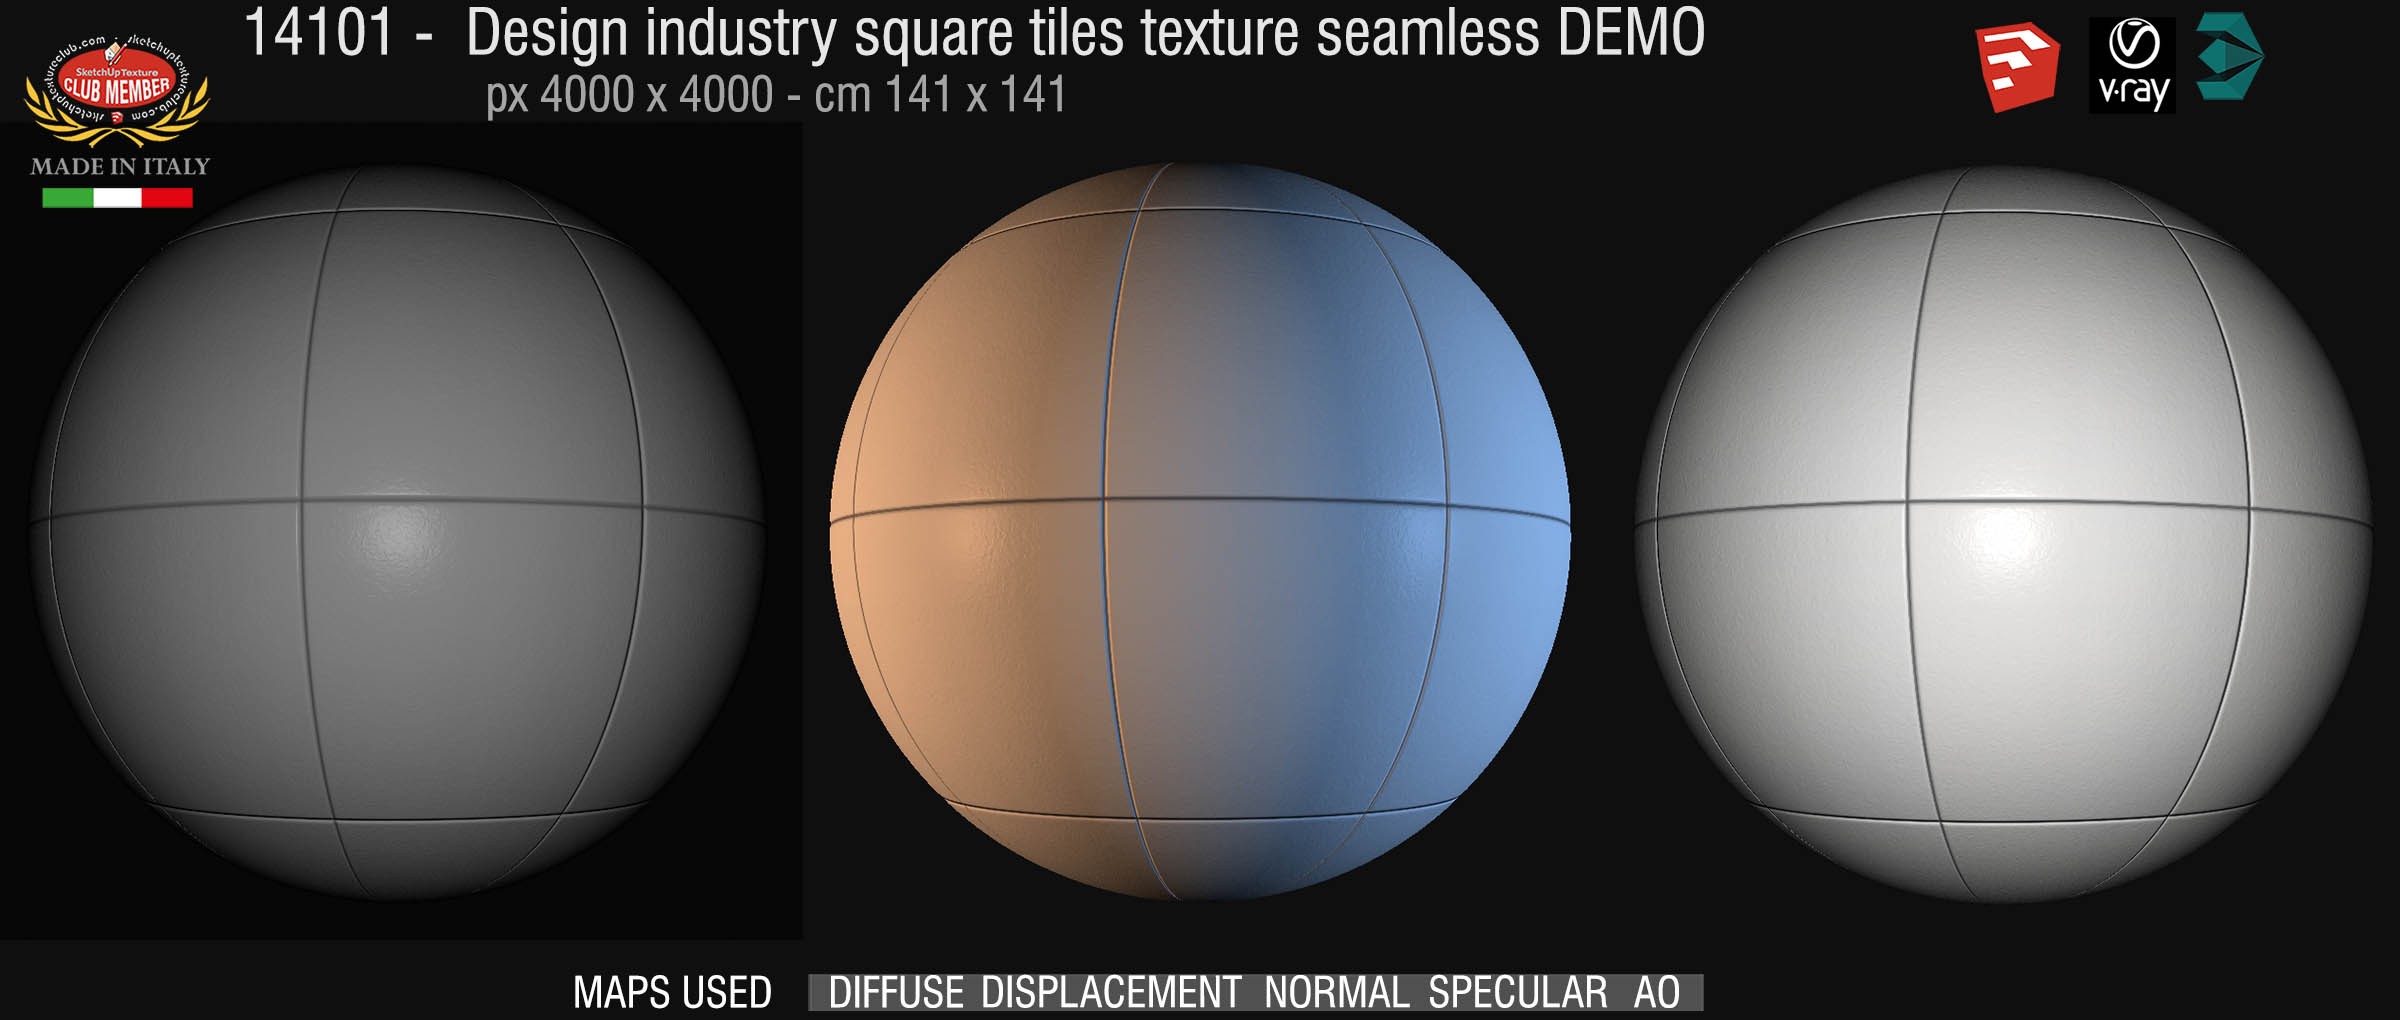 14101 Design industry square tile texture seamless + maps DEMO